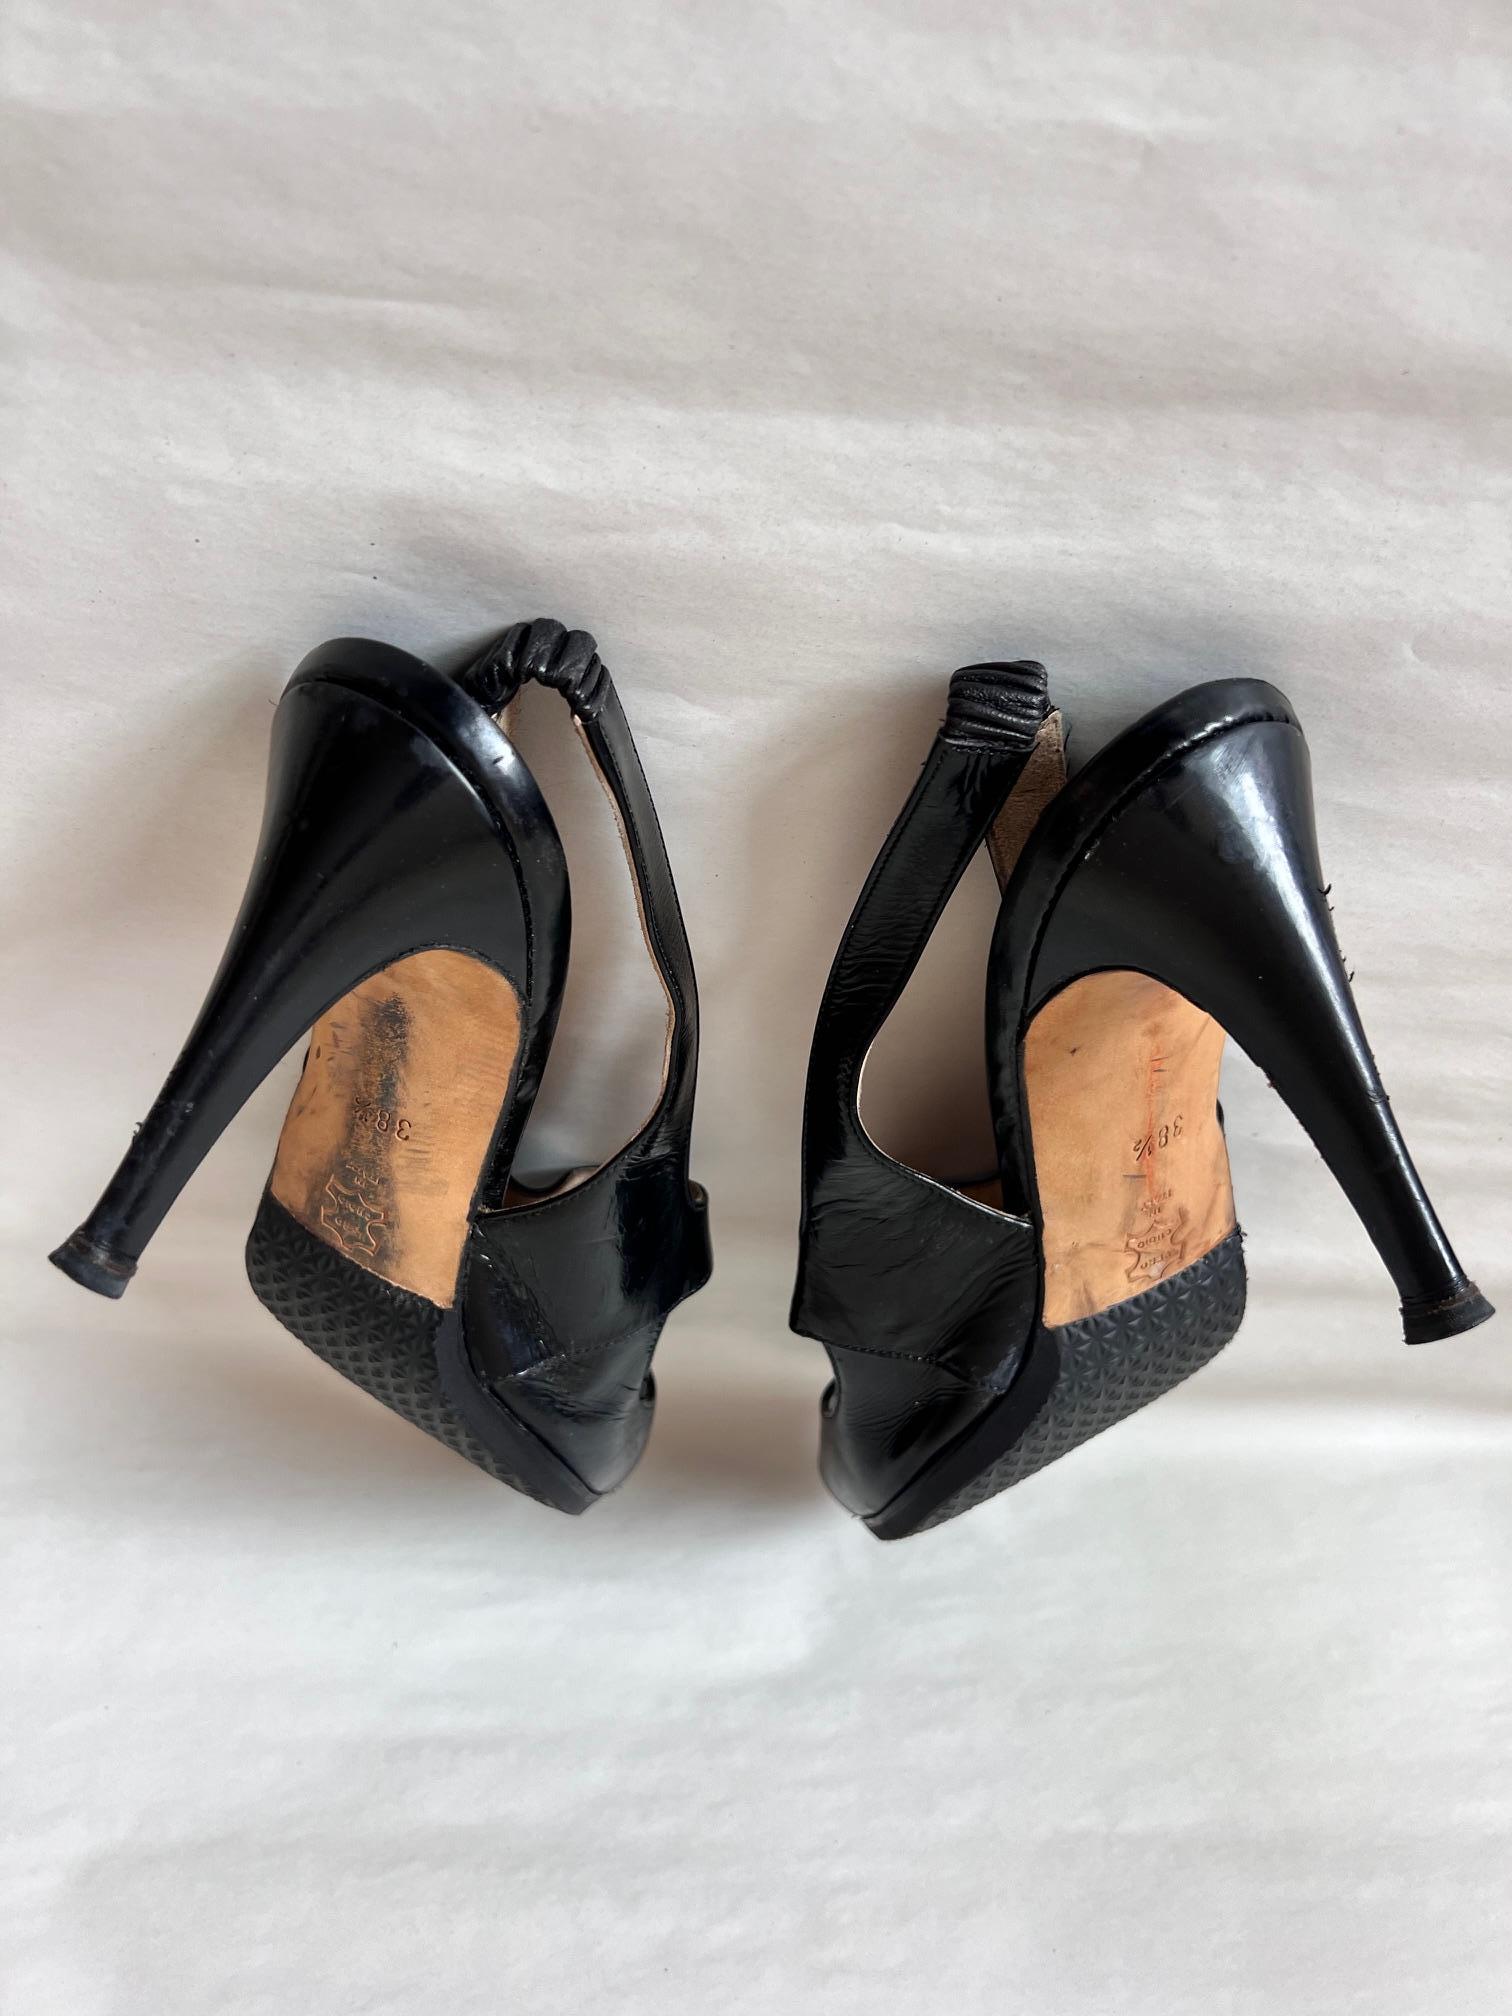 Manolo Blanik Black Satin Leather Cocktail Open Stripe Shoes For Sale 5